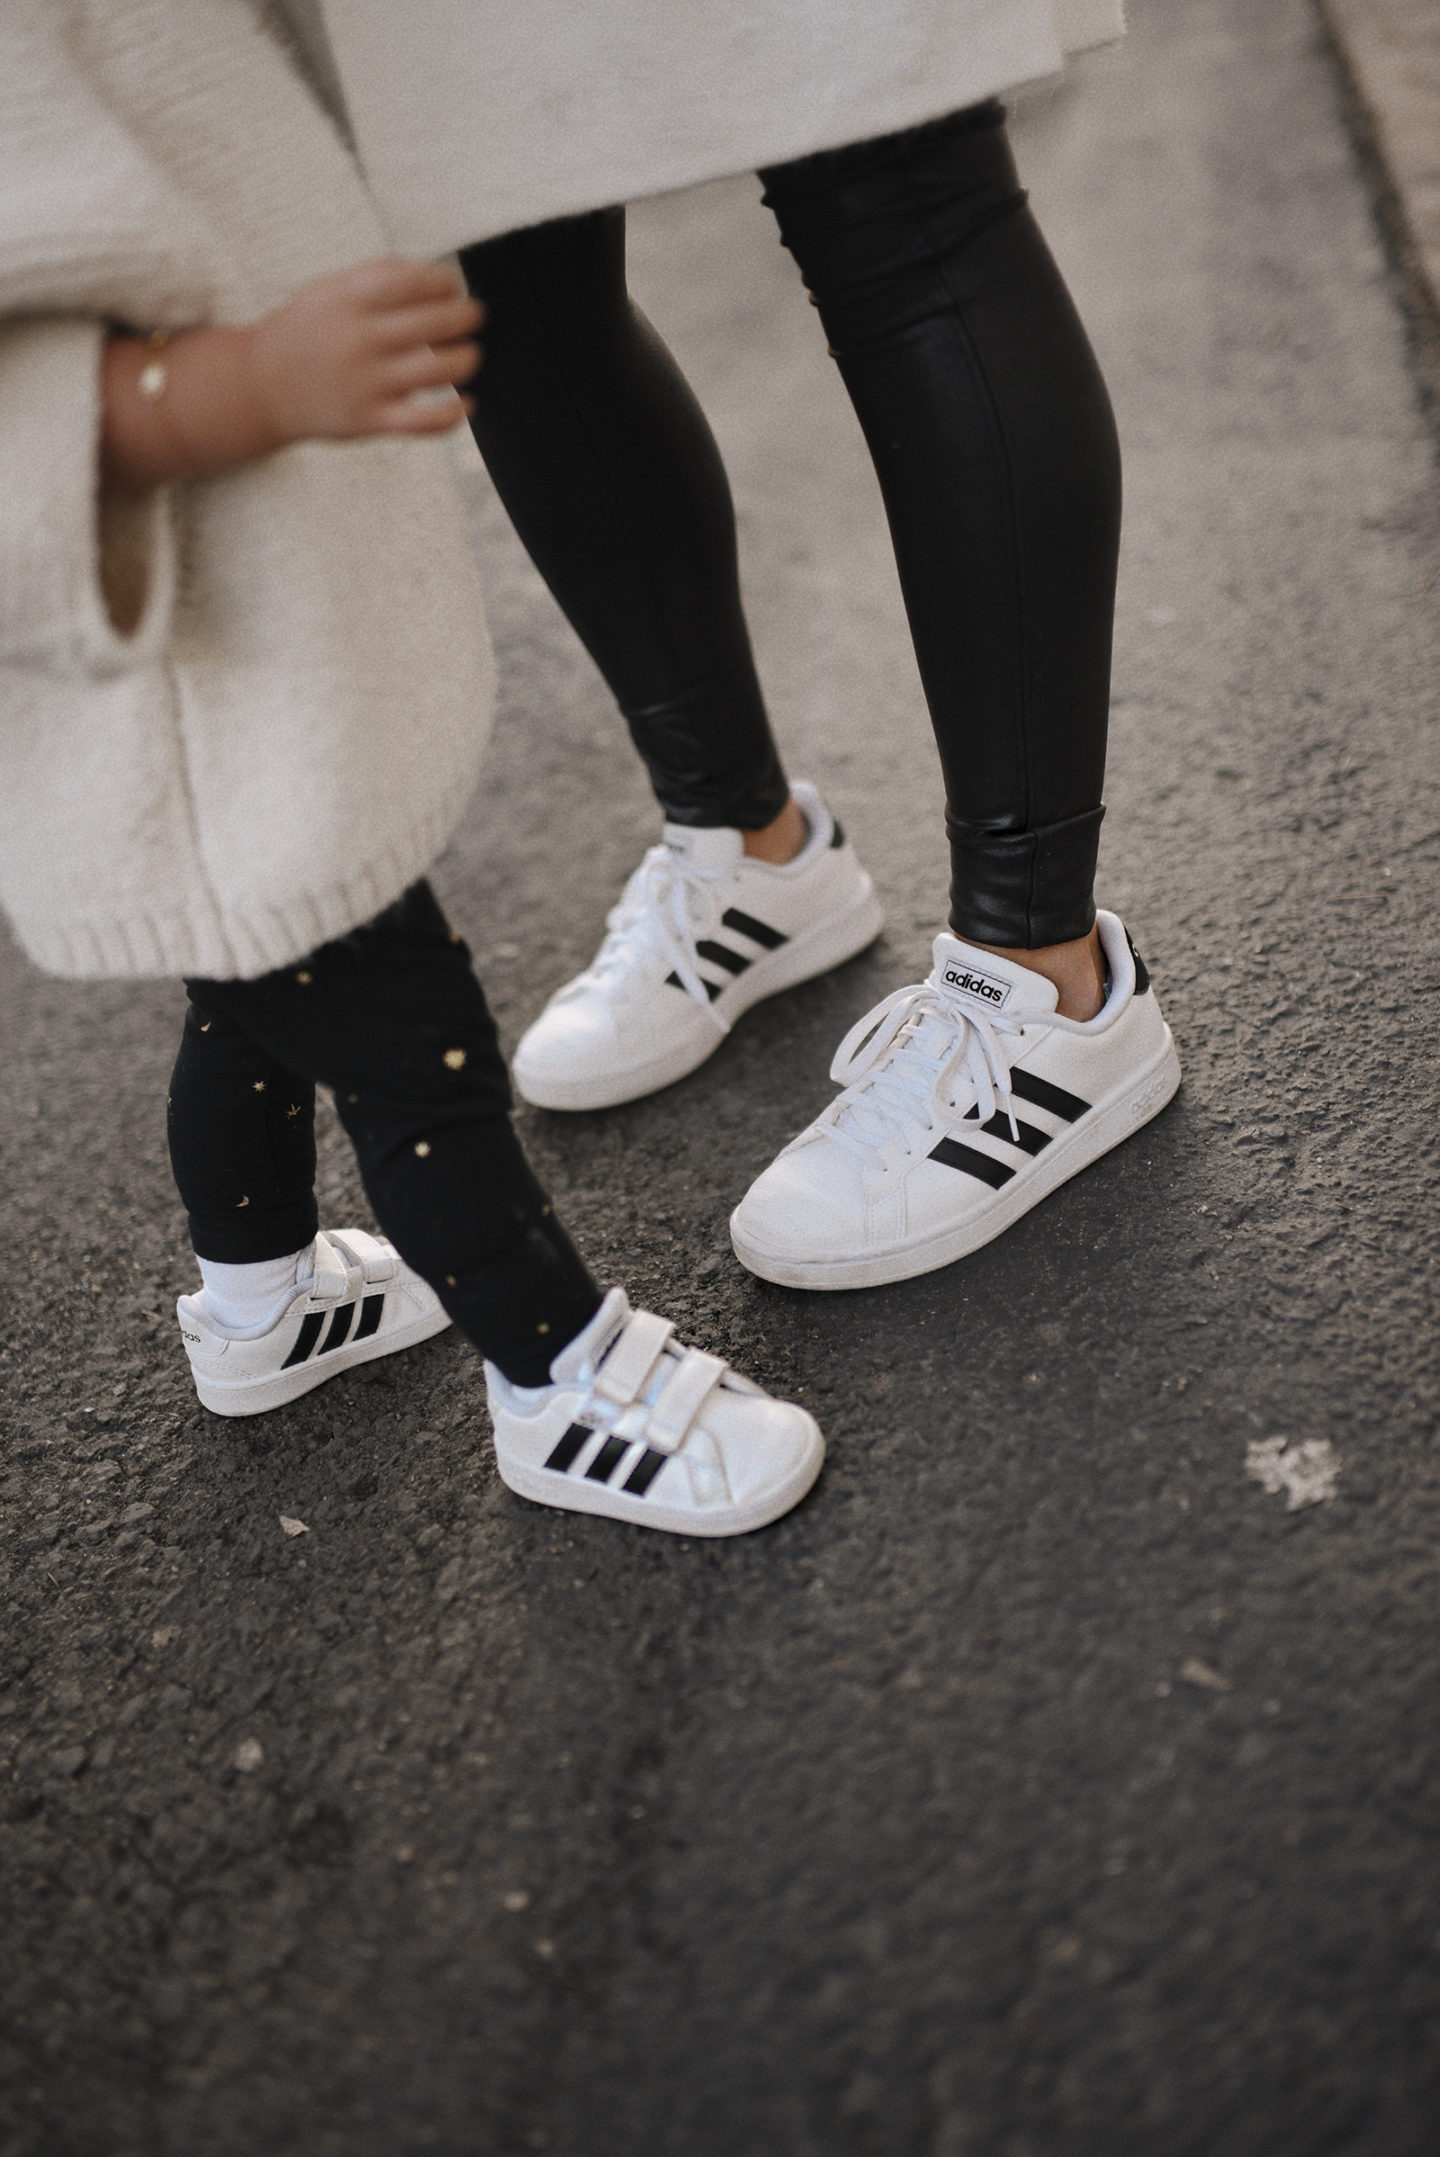 mother and daughter matching adidas outfits